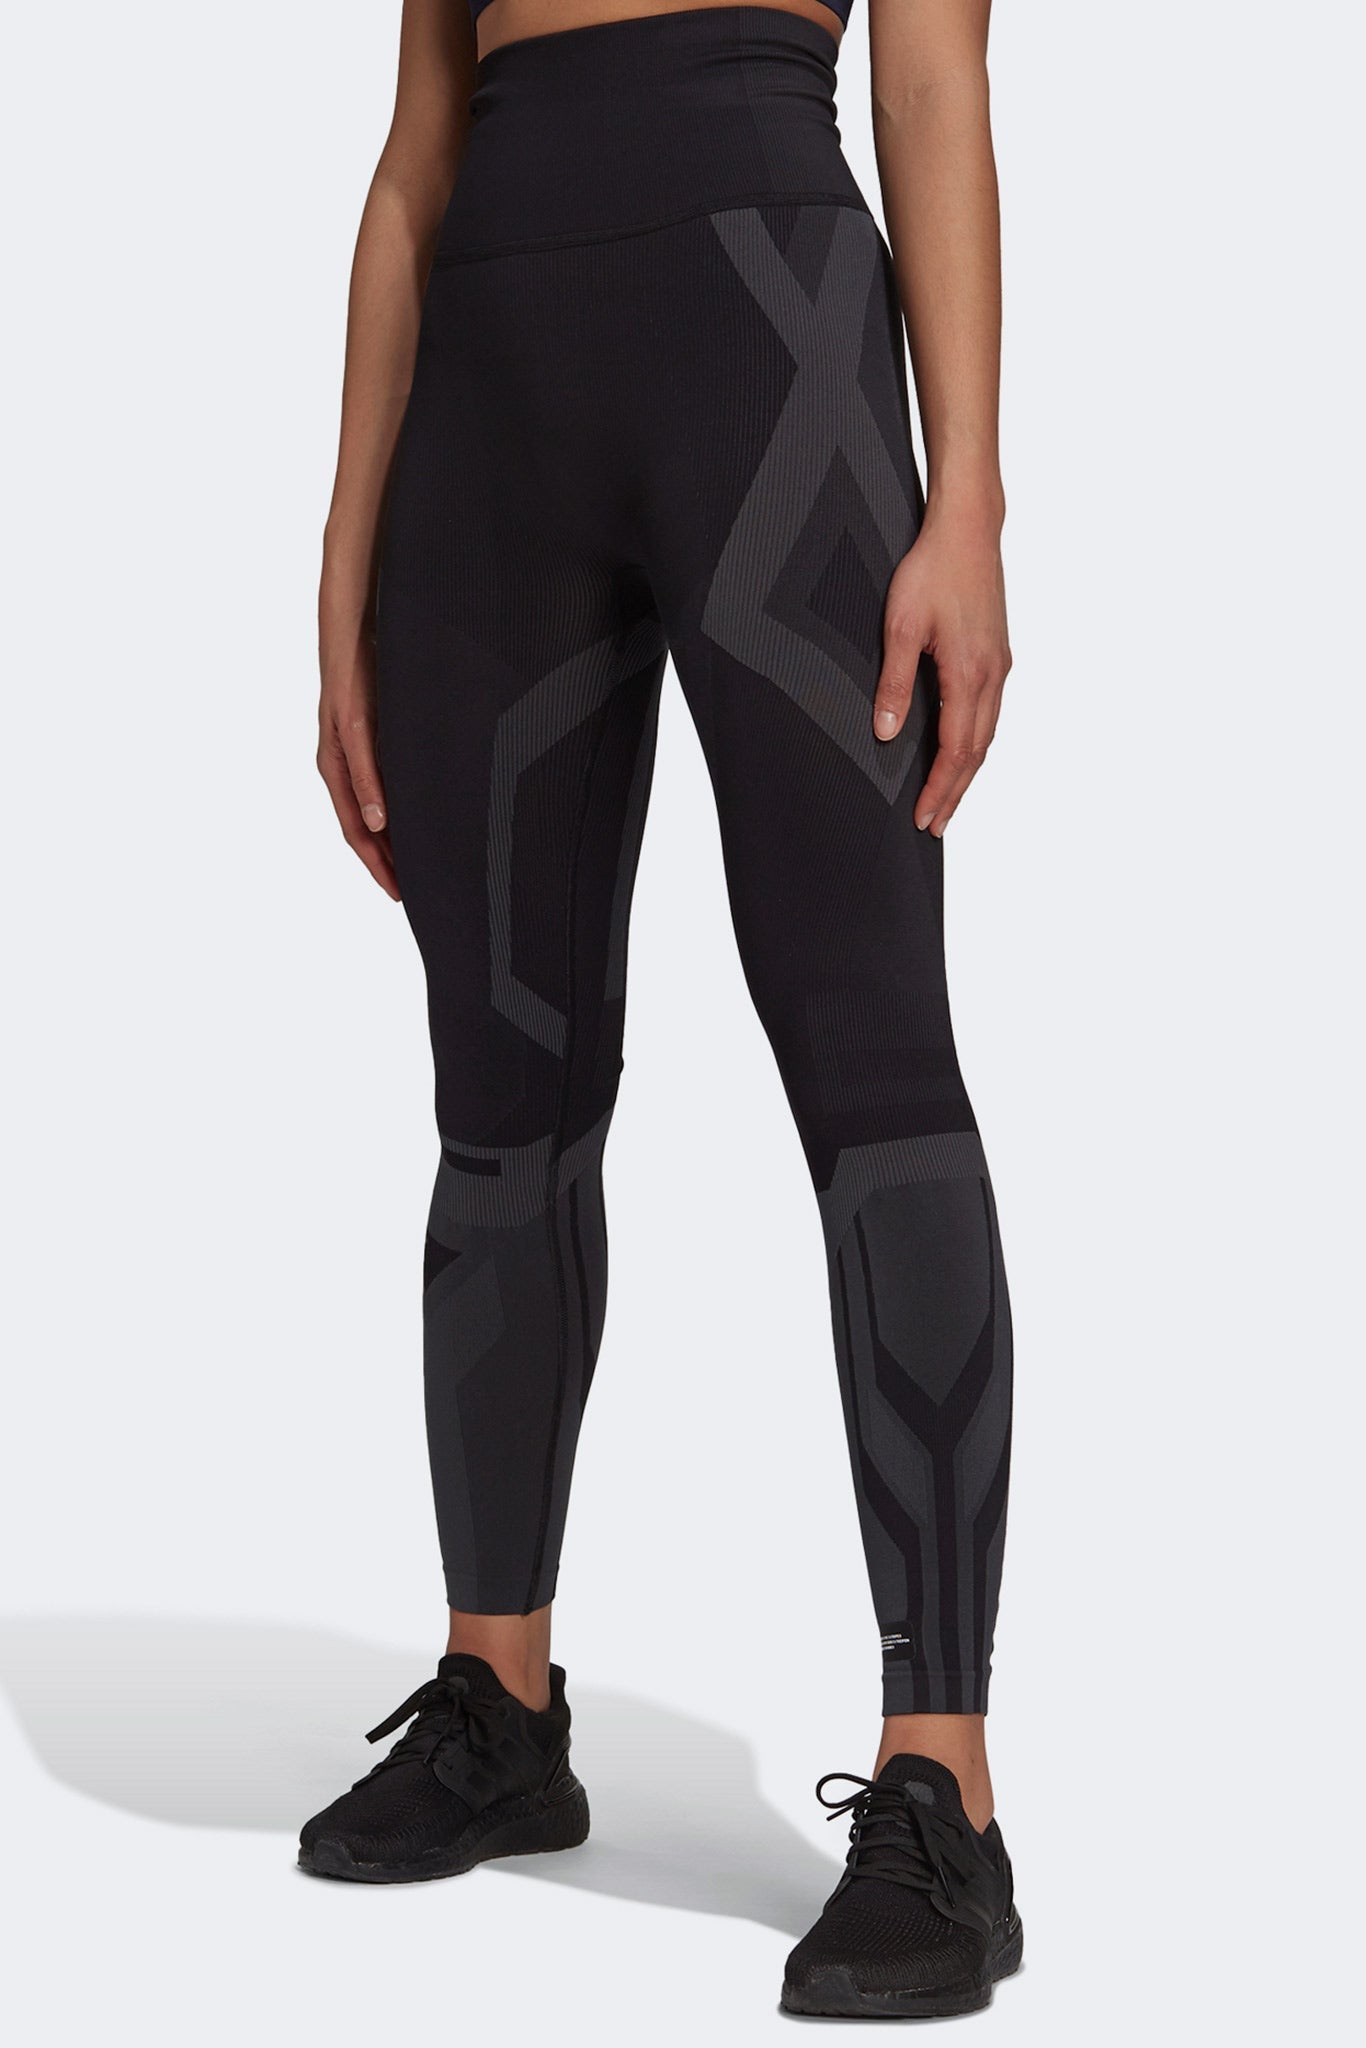 Adidas formotion sculpt two-tone tights - large